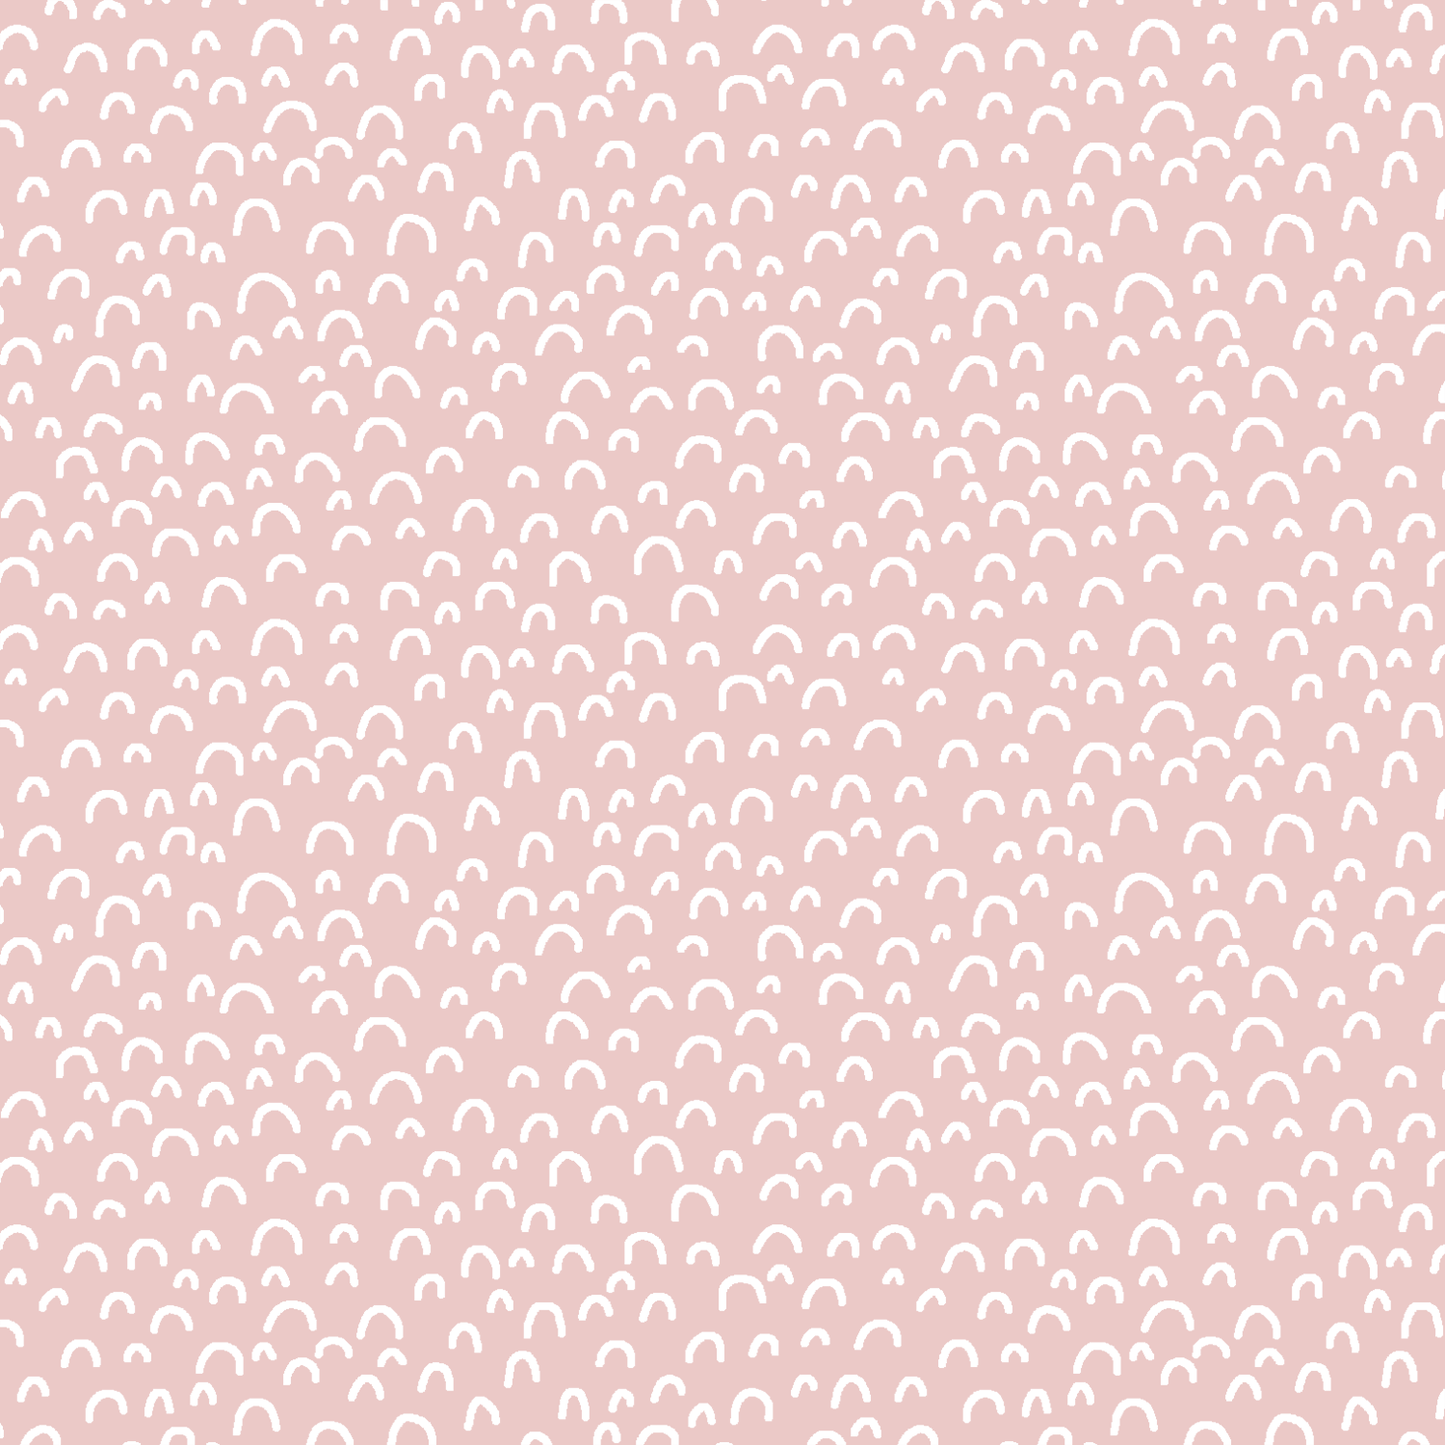 Doodle in Blush